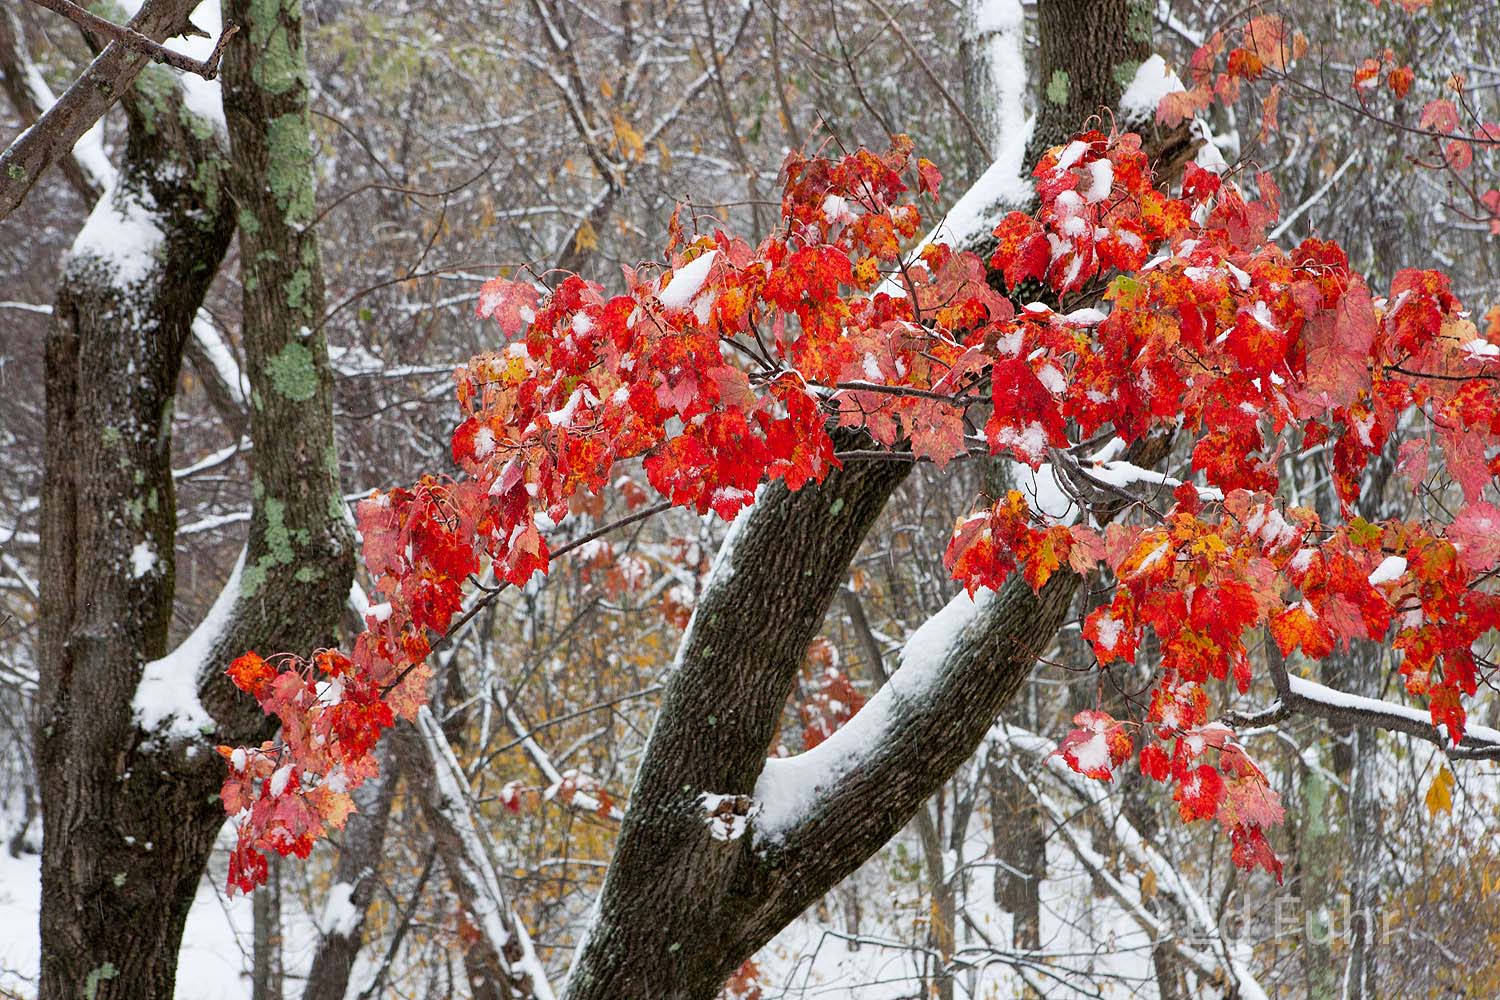 A red maple holds onto just a few of its final colorful leaves, a final reminder of fall, as winter's first snow arrives.